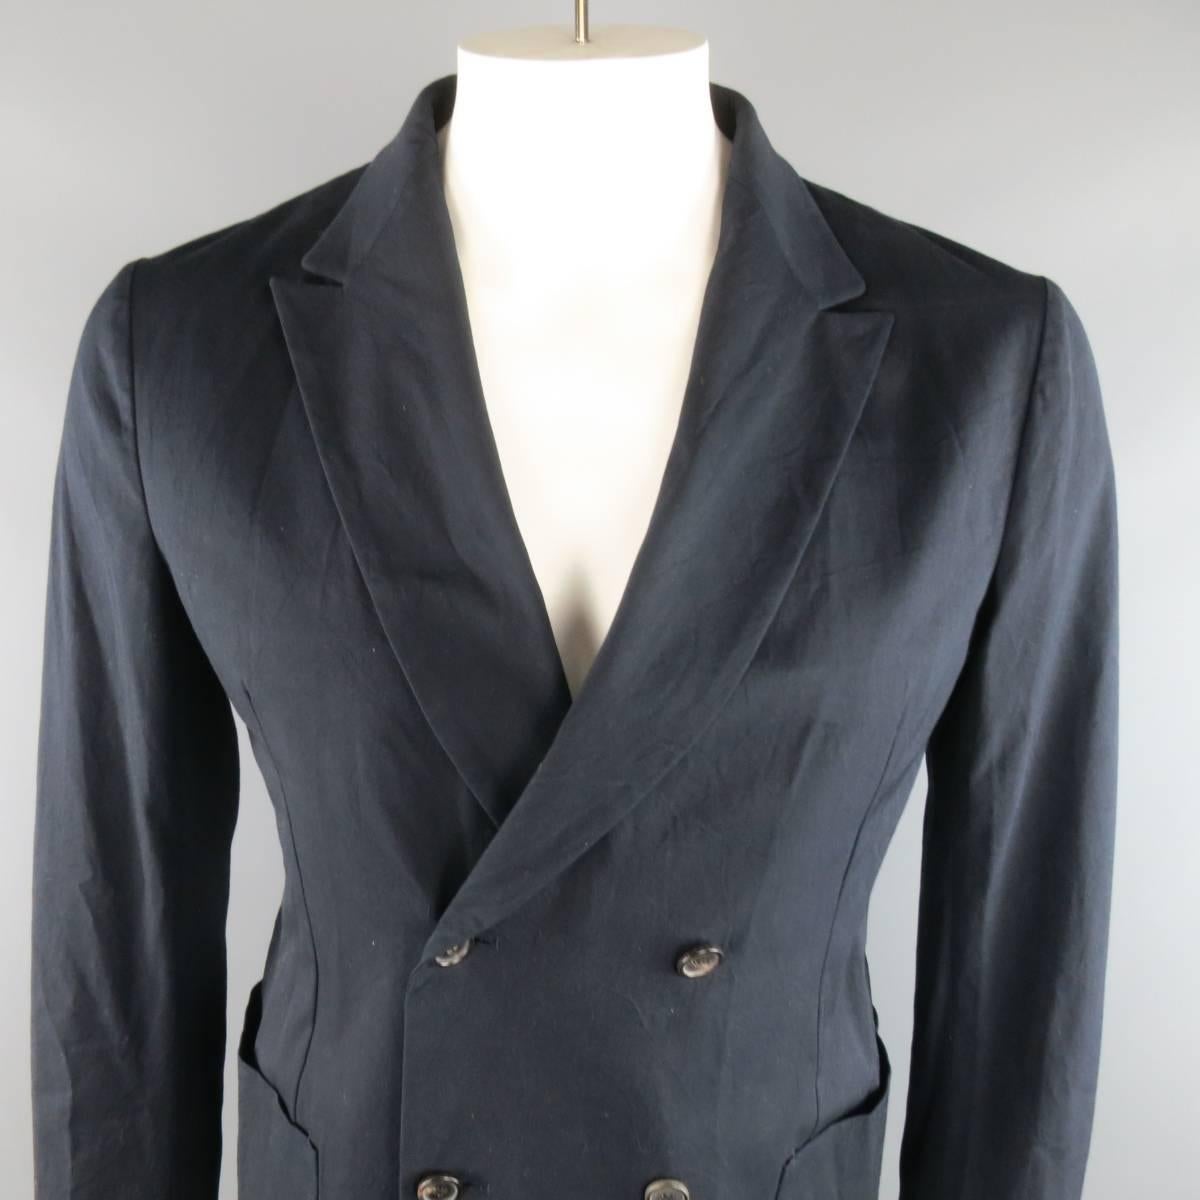 JIL SANDER double breasted sport coat comes in a casual weight navy blue cotton and features a peak lapel, double patch pockets, and a stretch polyamide knit back panel. Made in Italy.
 
New with Tags. Retails at $1495.00.
Marked: IT 52
